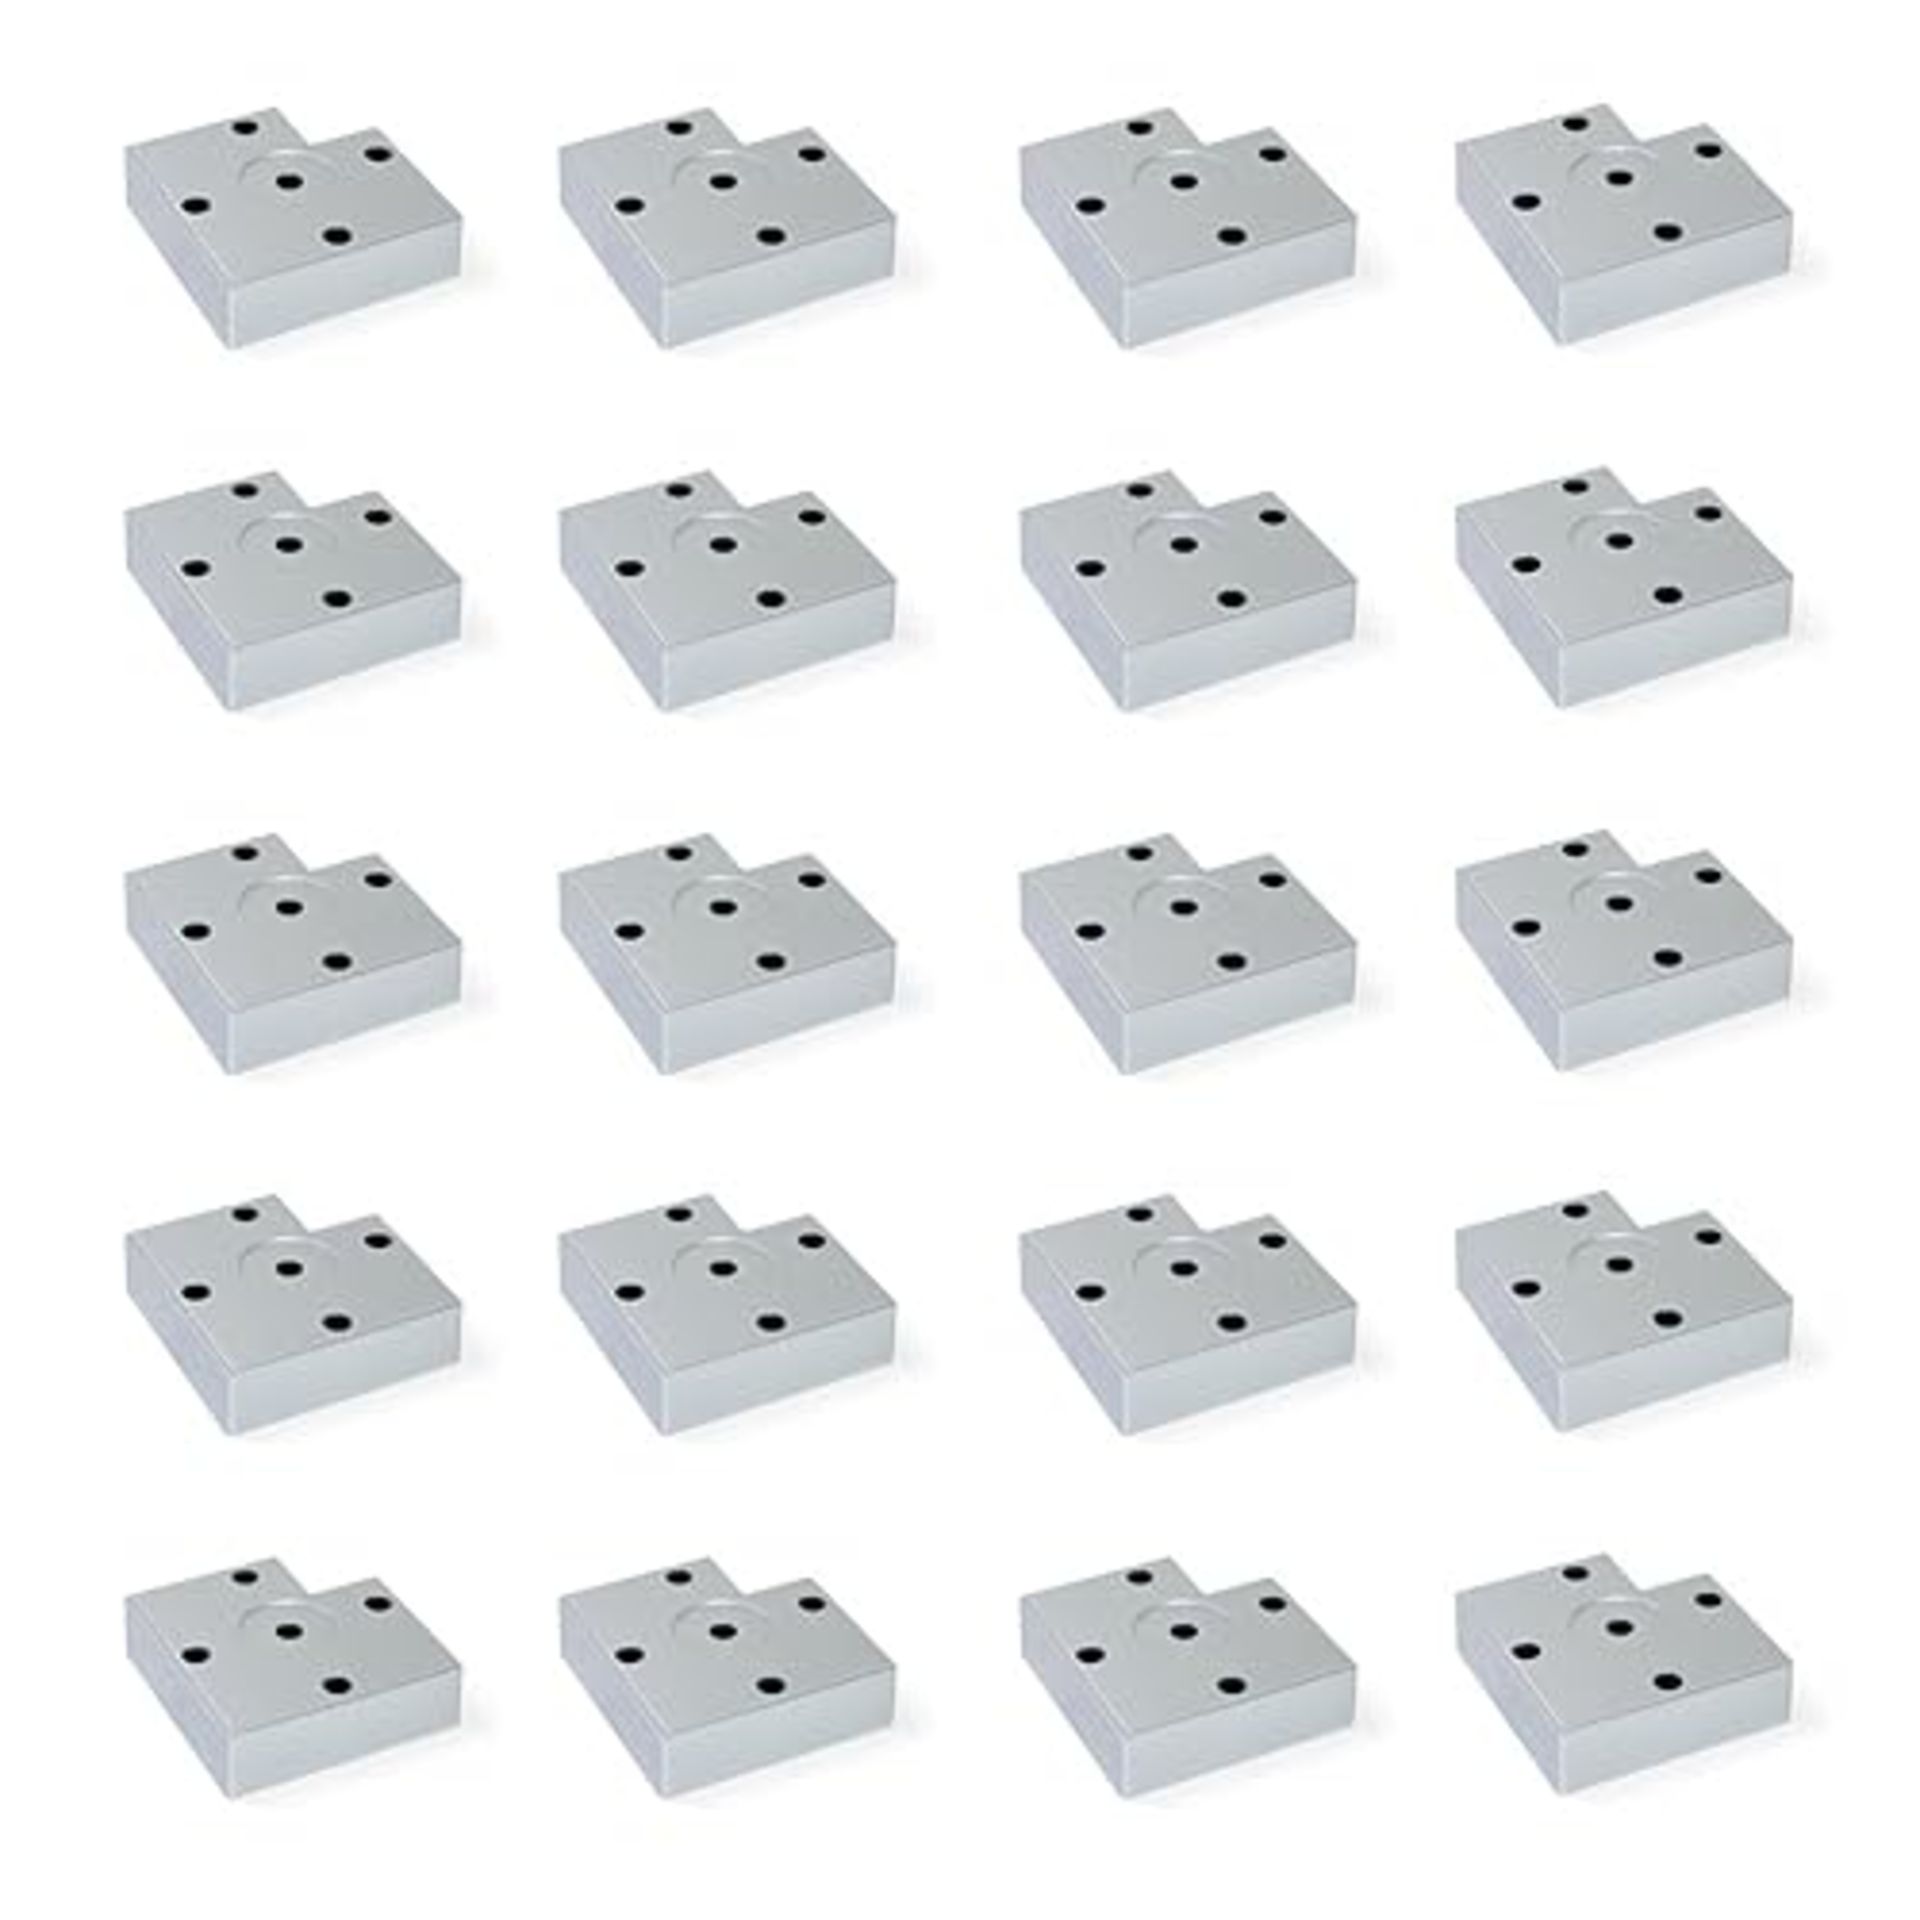 Emuca - Plastic Furniture Feet for Cabinet/Wardrobe/Sofa, Silver Painted, H 45mm, Set of 20 Pieces